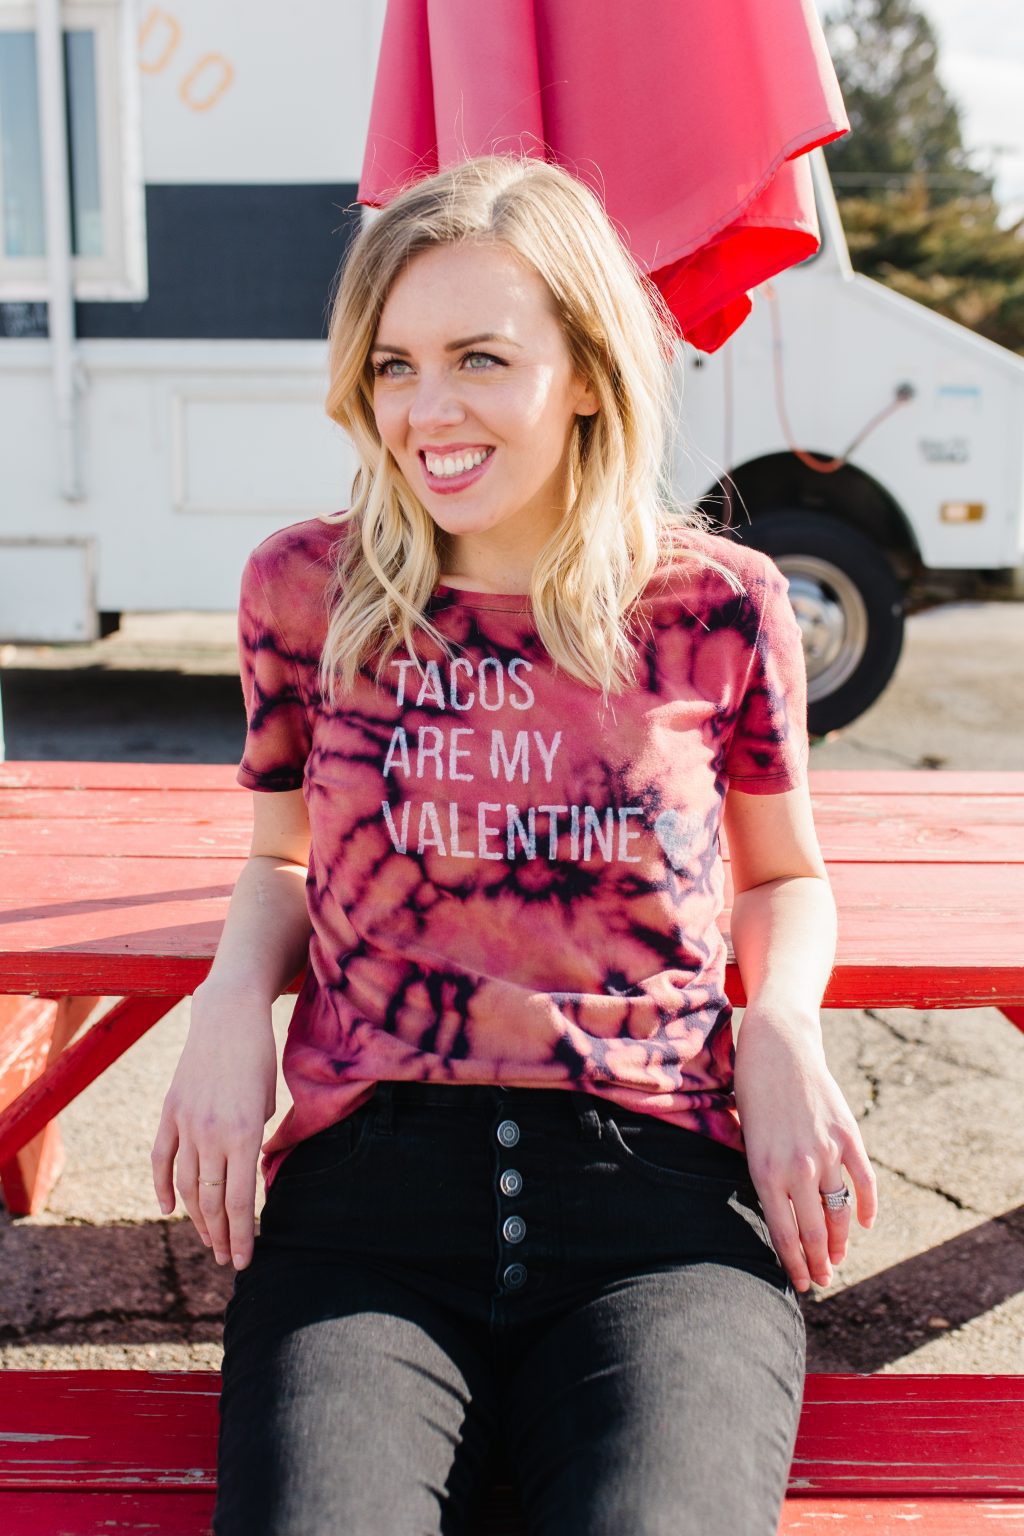 10 DIY Tie Dye Projects to Make + featured by Top US Craft Blog + The Pretty Life Girls: Reverse Tie Dye Anti Valentines Day Shirt